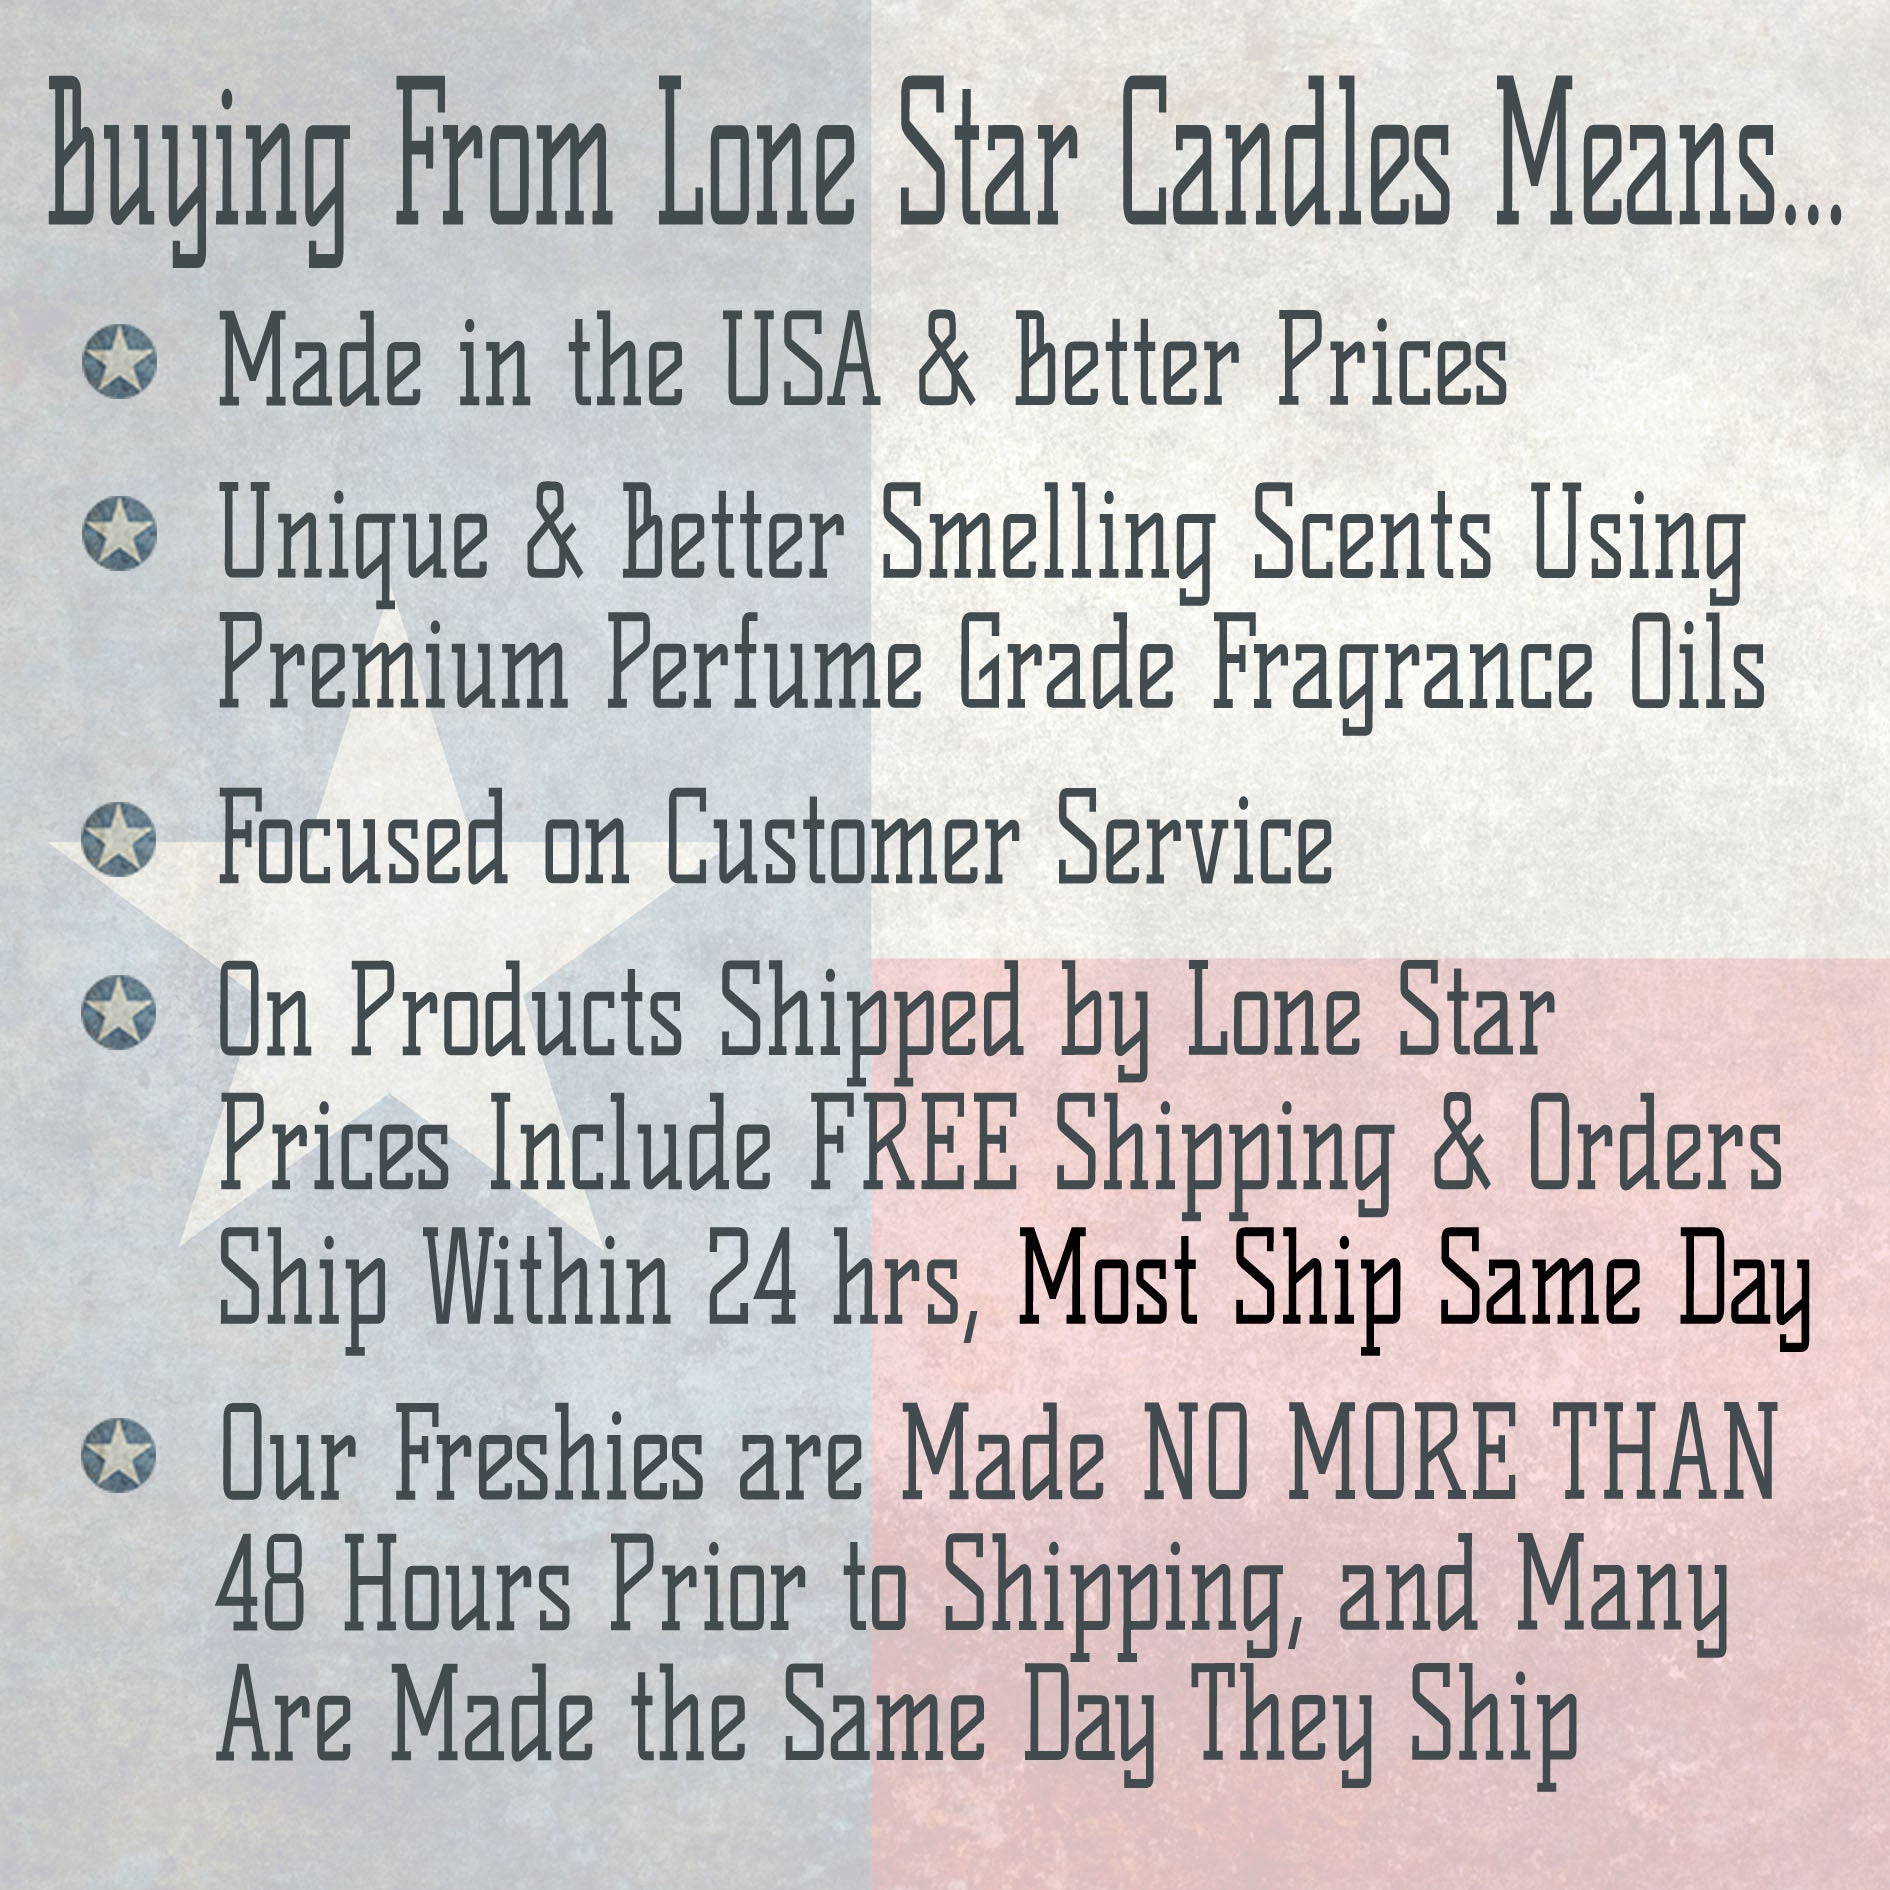 Leather & Lace, Lone Star Candles & More’s Premium Strongly Scented Freshies, Aroma of Genuine Leather and Creamy Vanilla, Car & Air Freshener, USA Made in Texas, Truck & Christmas Tree 1-Pack